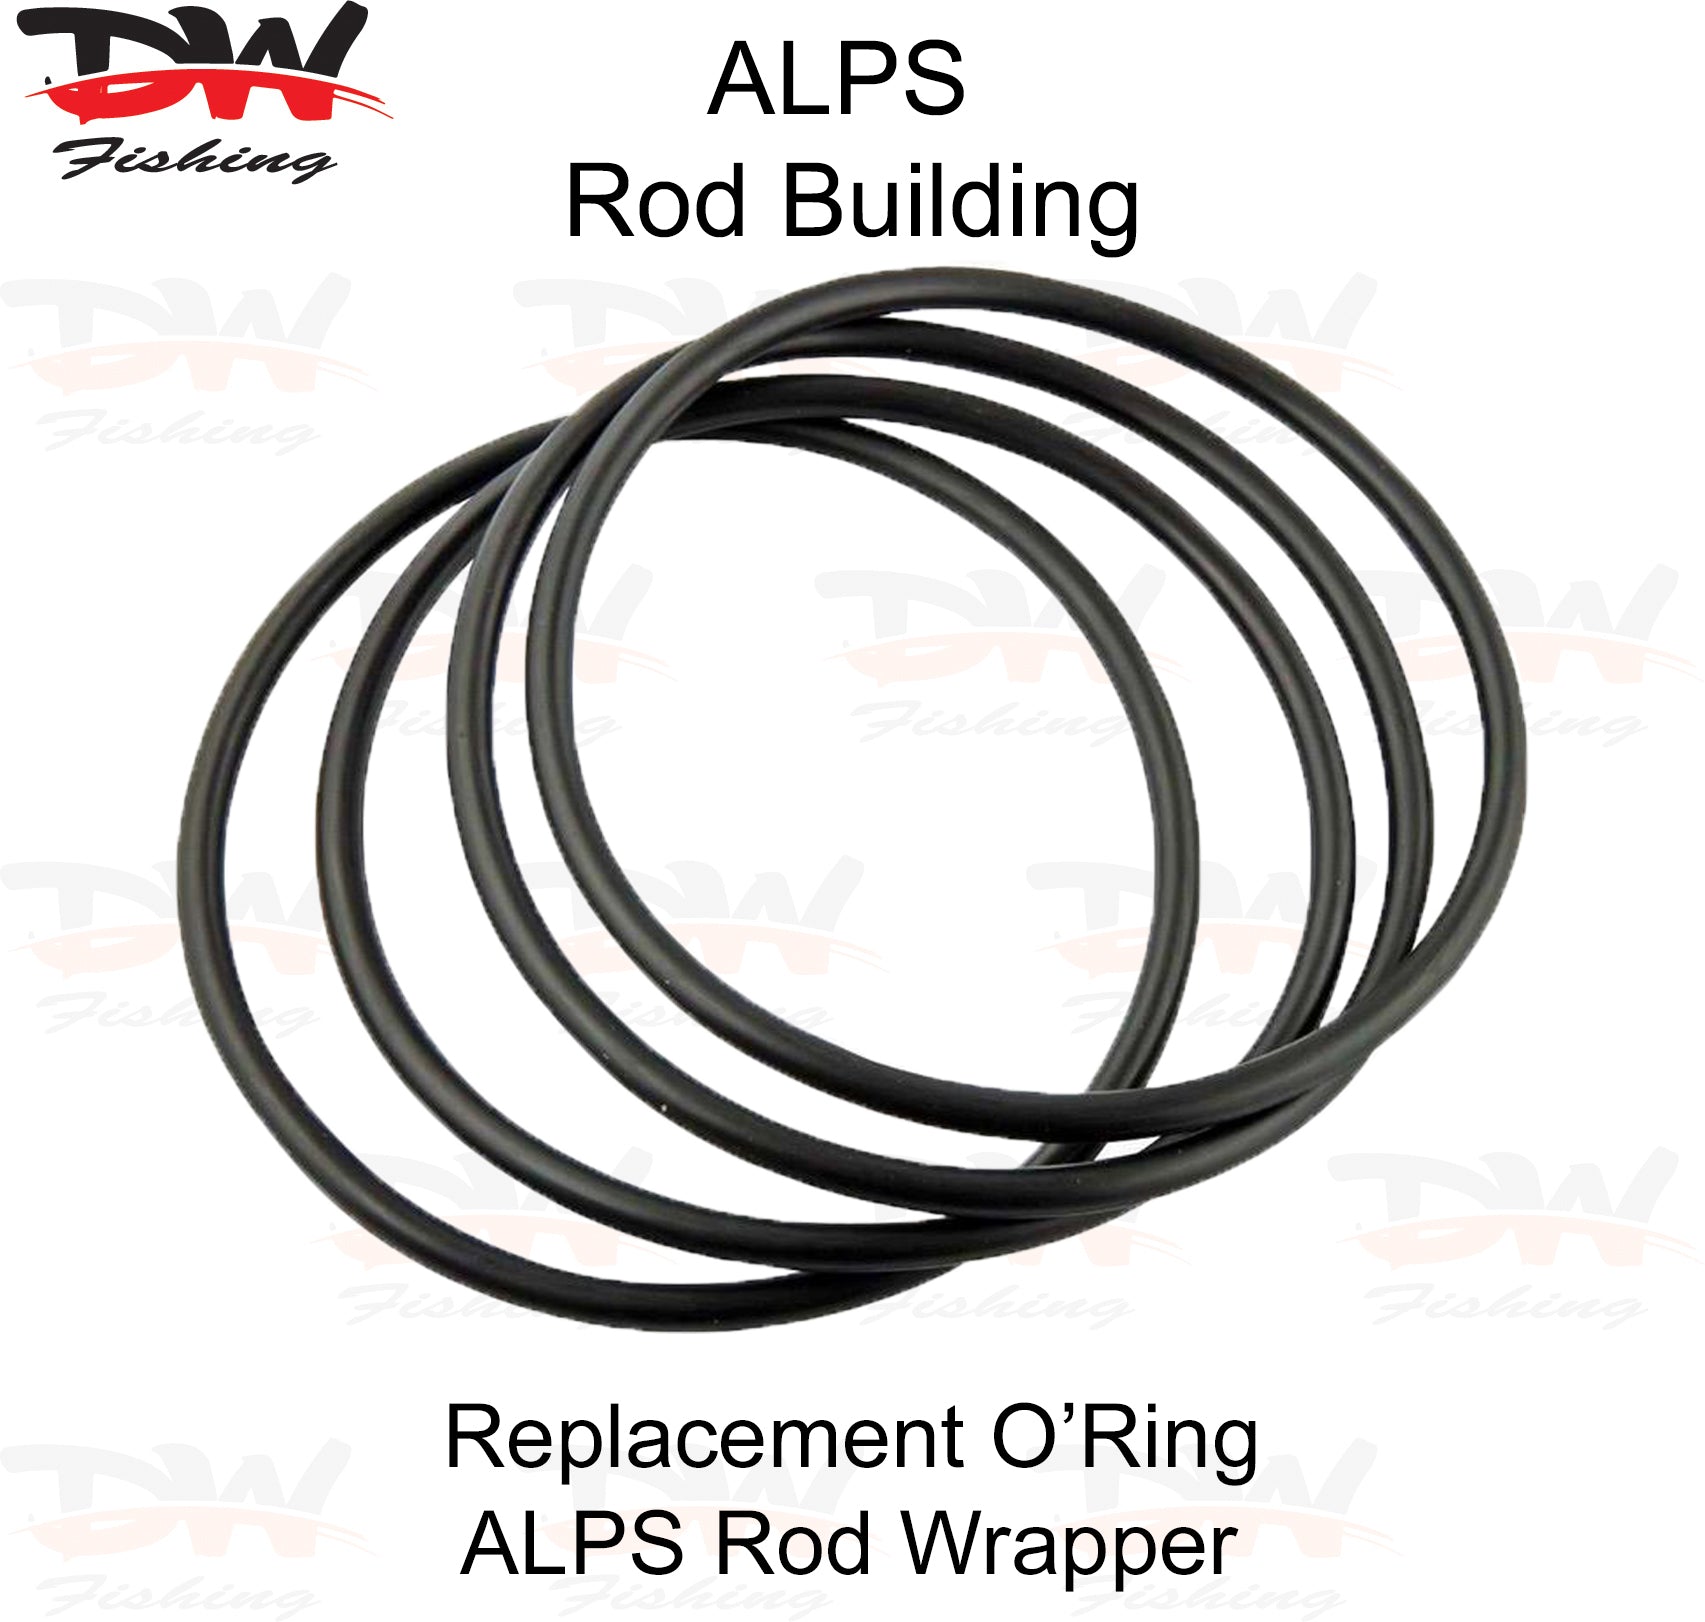 ALPS Rod Wrapper Replacement O'Ring, Rod Building